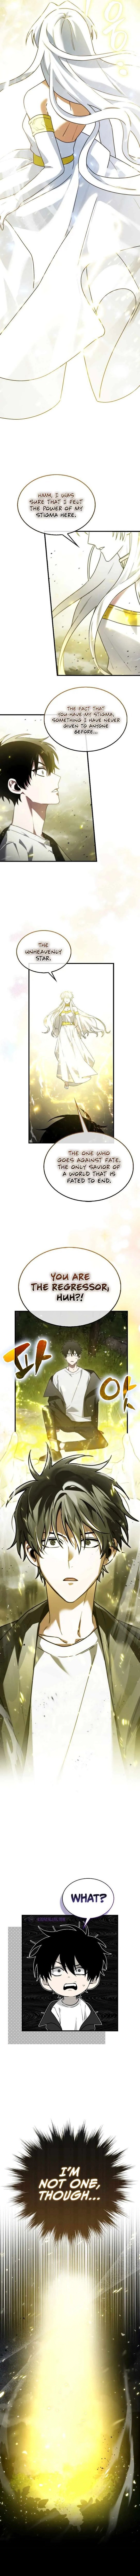 I’m Not a Regressor Chapter 1 page 17